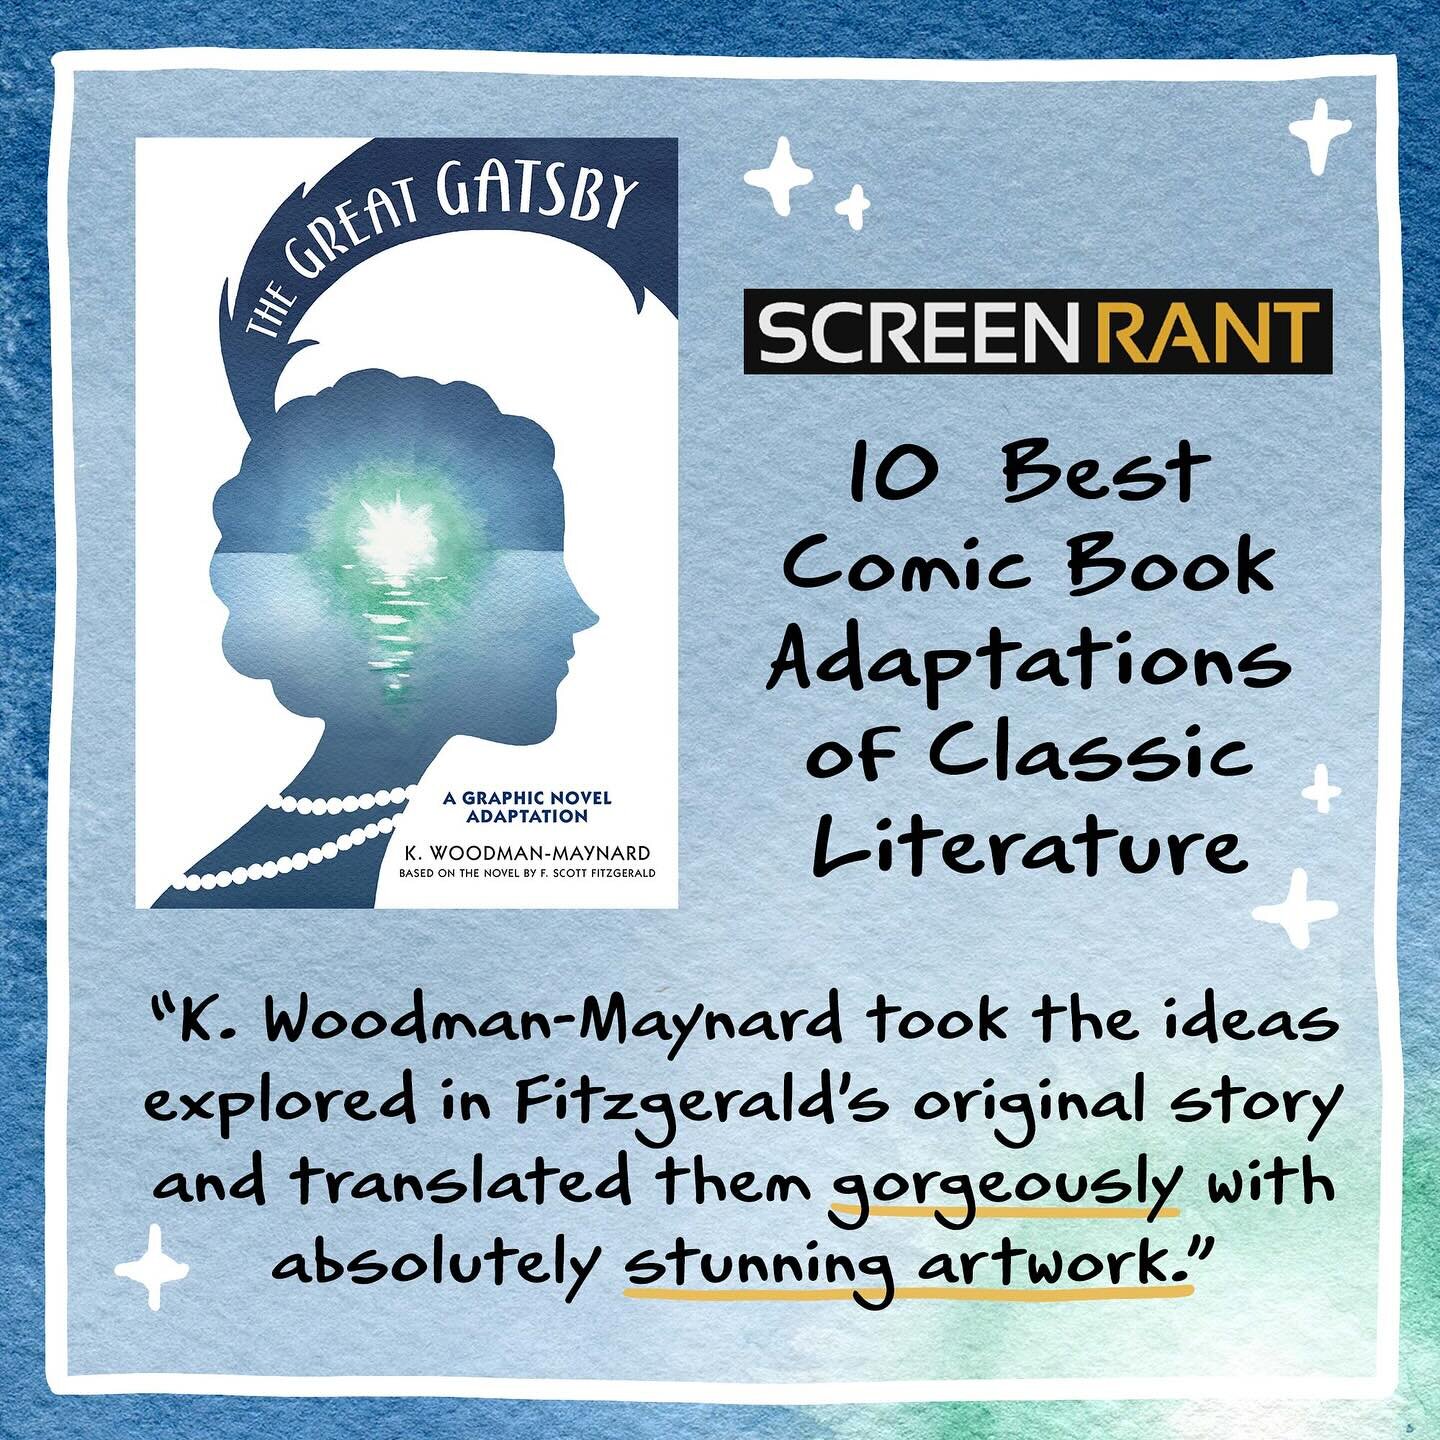 One thing I didn&rsquo;t appreciate when making my graphic novel adaptation of Gatsby was the evergreen nature of the book. Even three years after it came out, I was surprised this morning by this lovely review in @Screenrant and inclusion in a list 